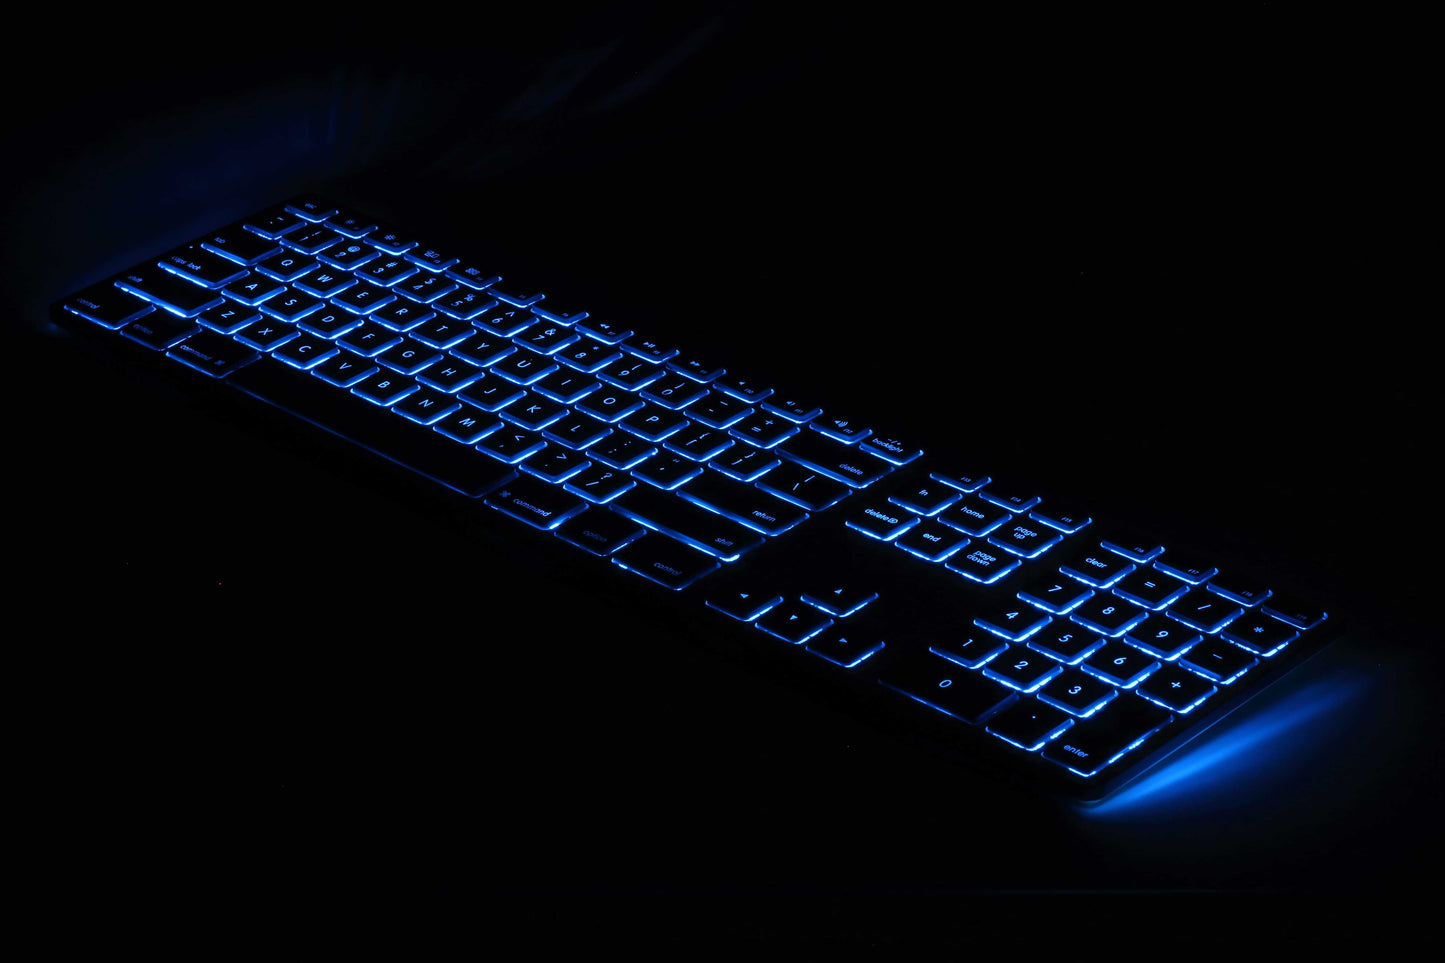 RGB Backlit Wired Aluminum Keyboard for PC - Black